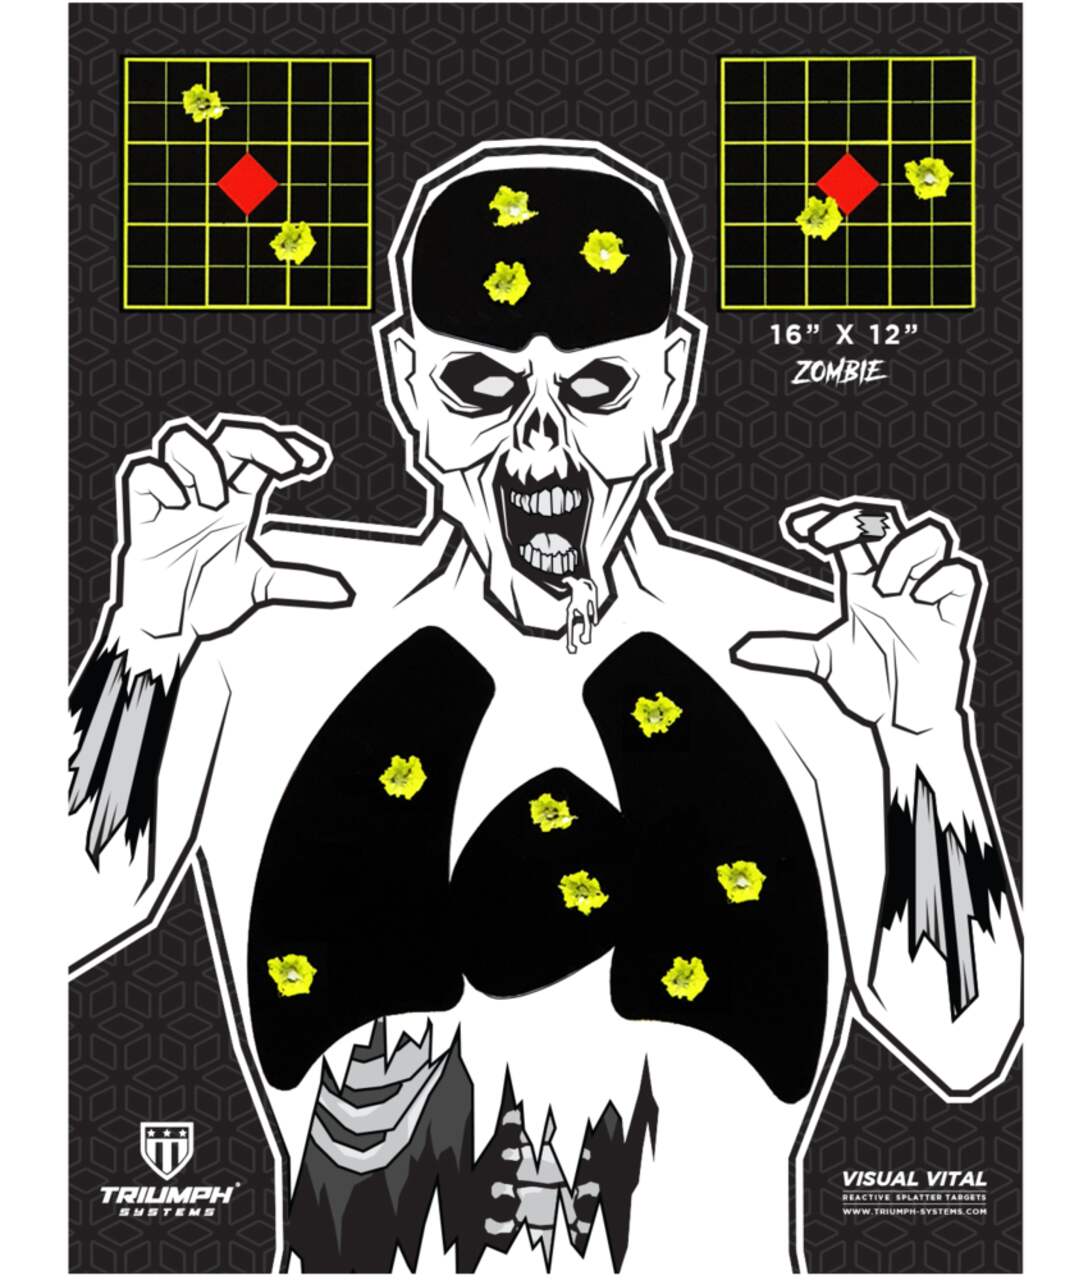 https://media-www.canadiantire.ca/product/playing/hunting/hunting-accessories/1759869/triumph-visual-vital-zombie-5-pack-targets-f735a222-2867-4d2b-9f75-0e59443ffdf4.png?imdensity=1&imwidth=640&impolicy=mZoom